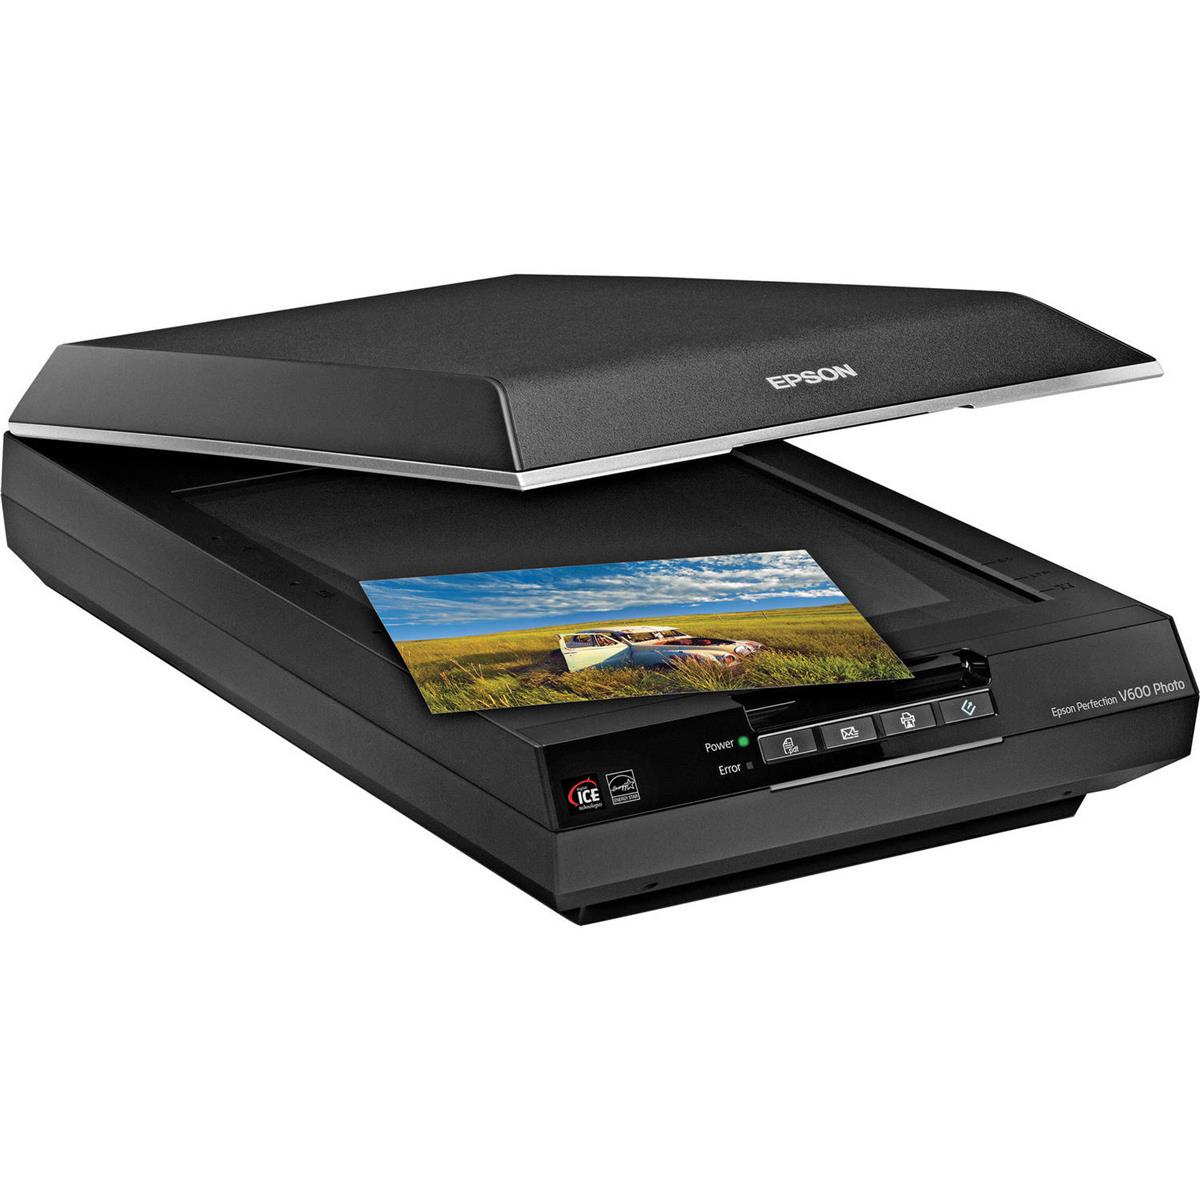 

Epson Perfection V600, Flatbed 8.5x11.7" Photo Scanner - Refurbished by Epson